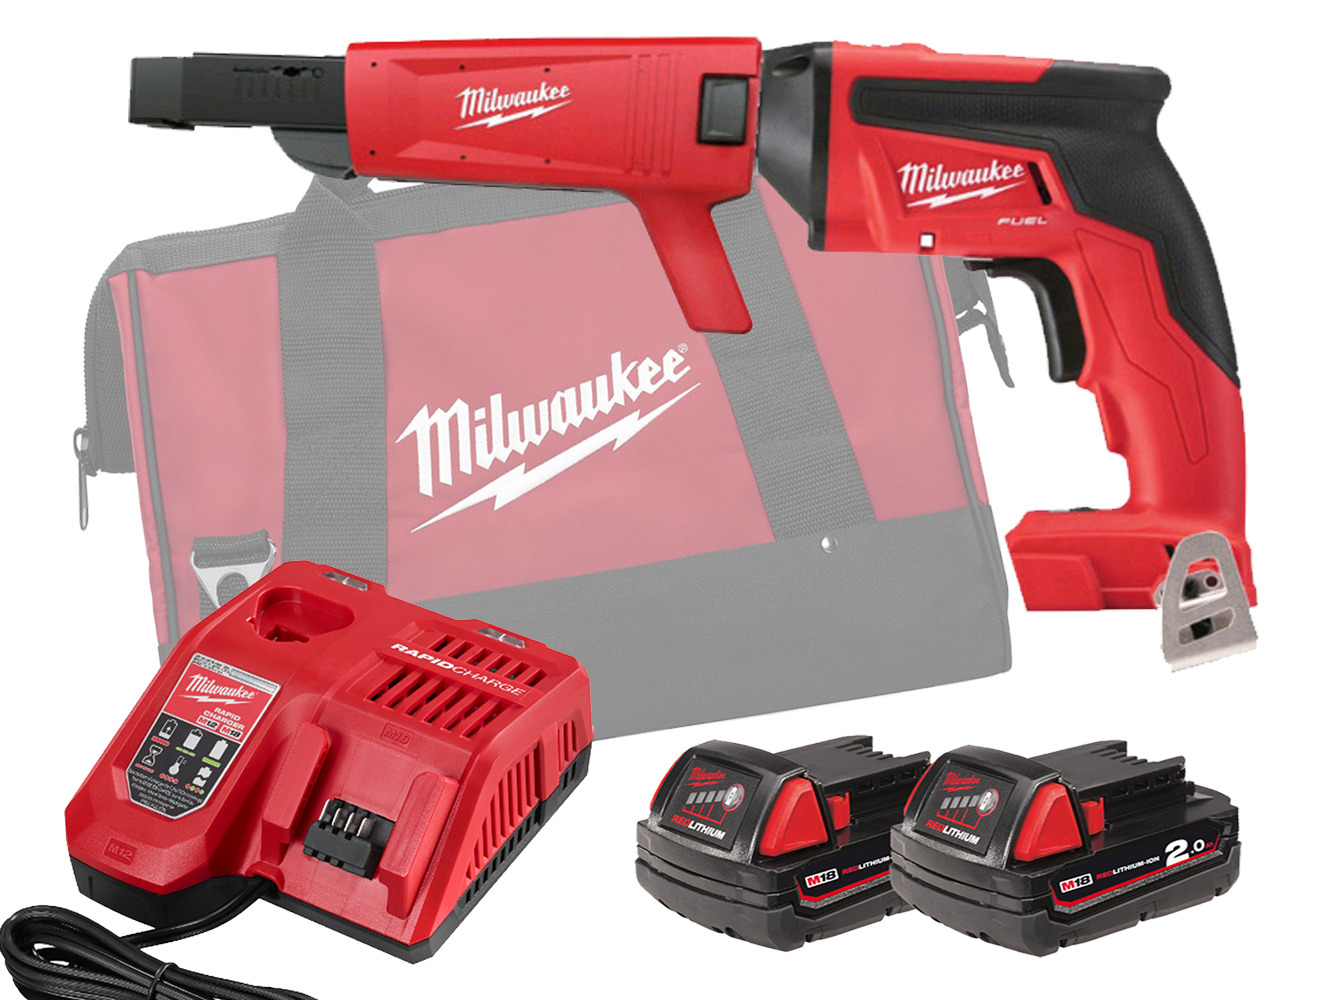 Milwaukee M18FSGC 18V Fuel Screw Gun With Collated Attachment - 2.0Ah Pack